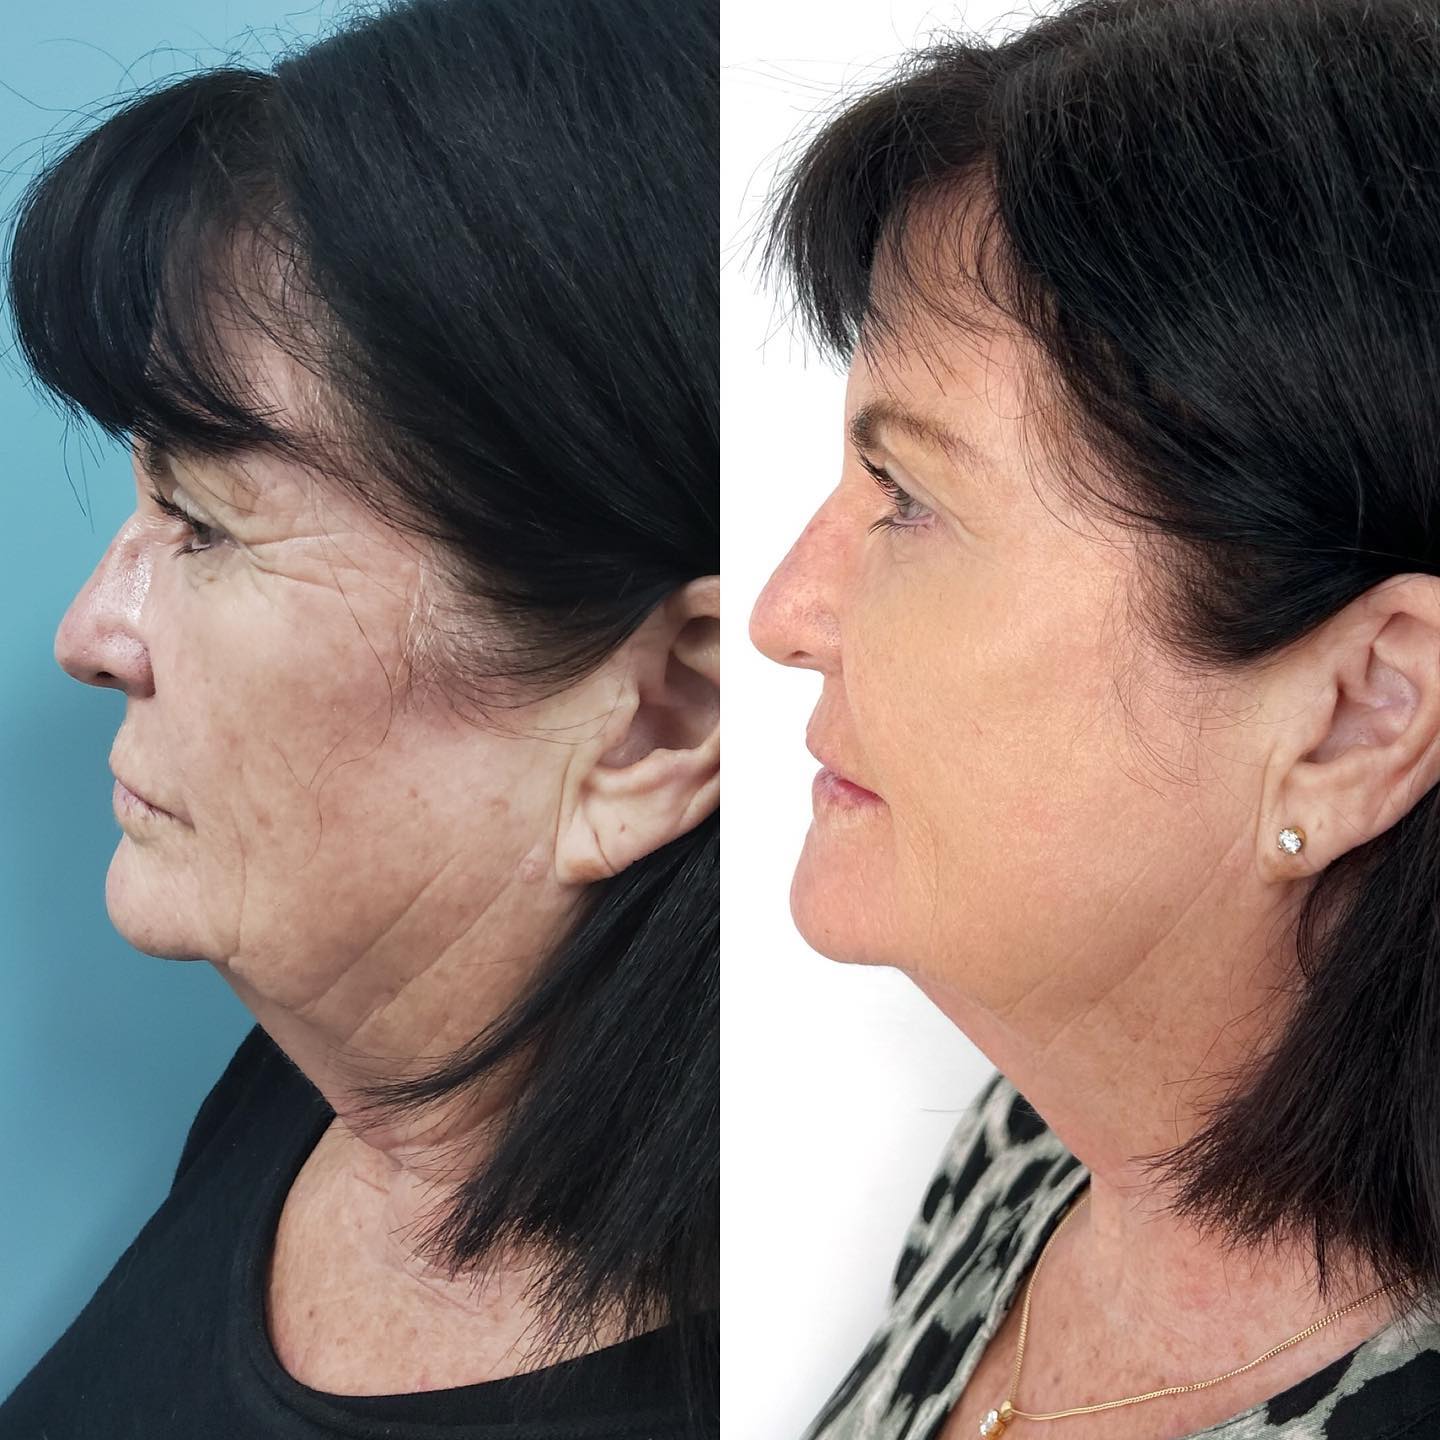 Before And After Photo Of A Woman from Wollongong Undergoing Anti-Wrinkle Injections